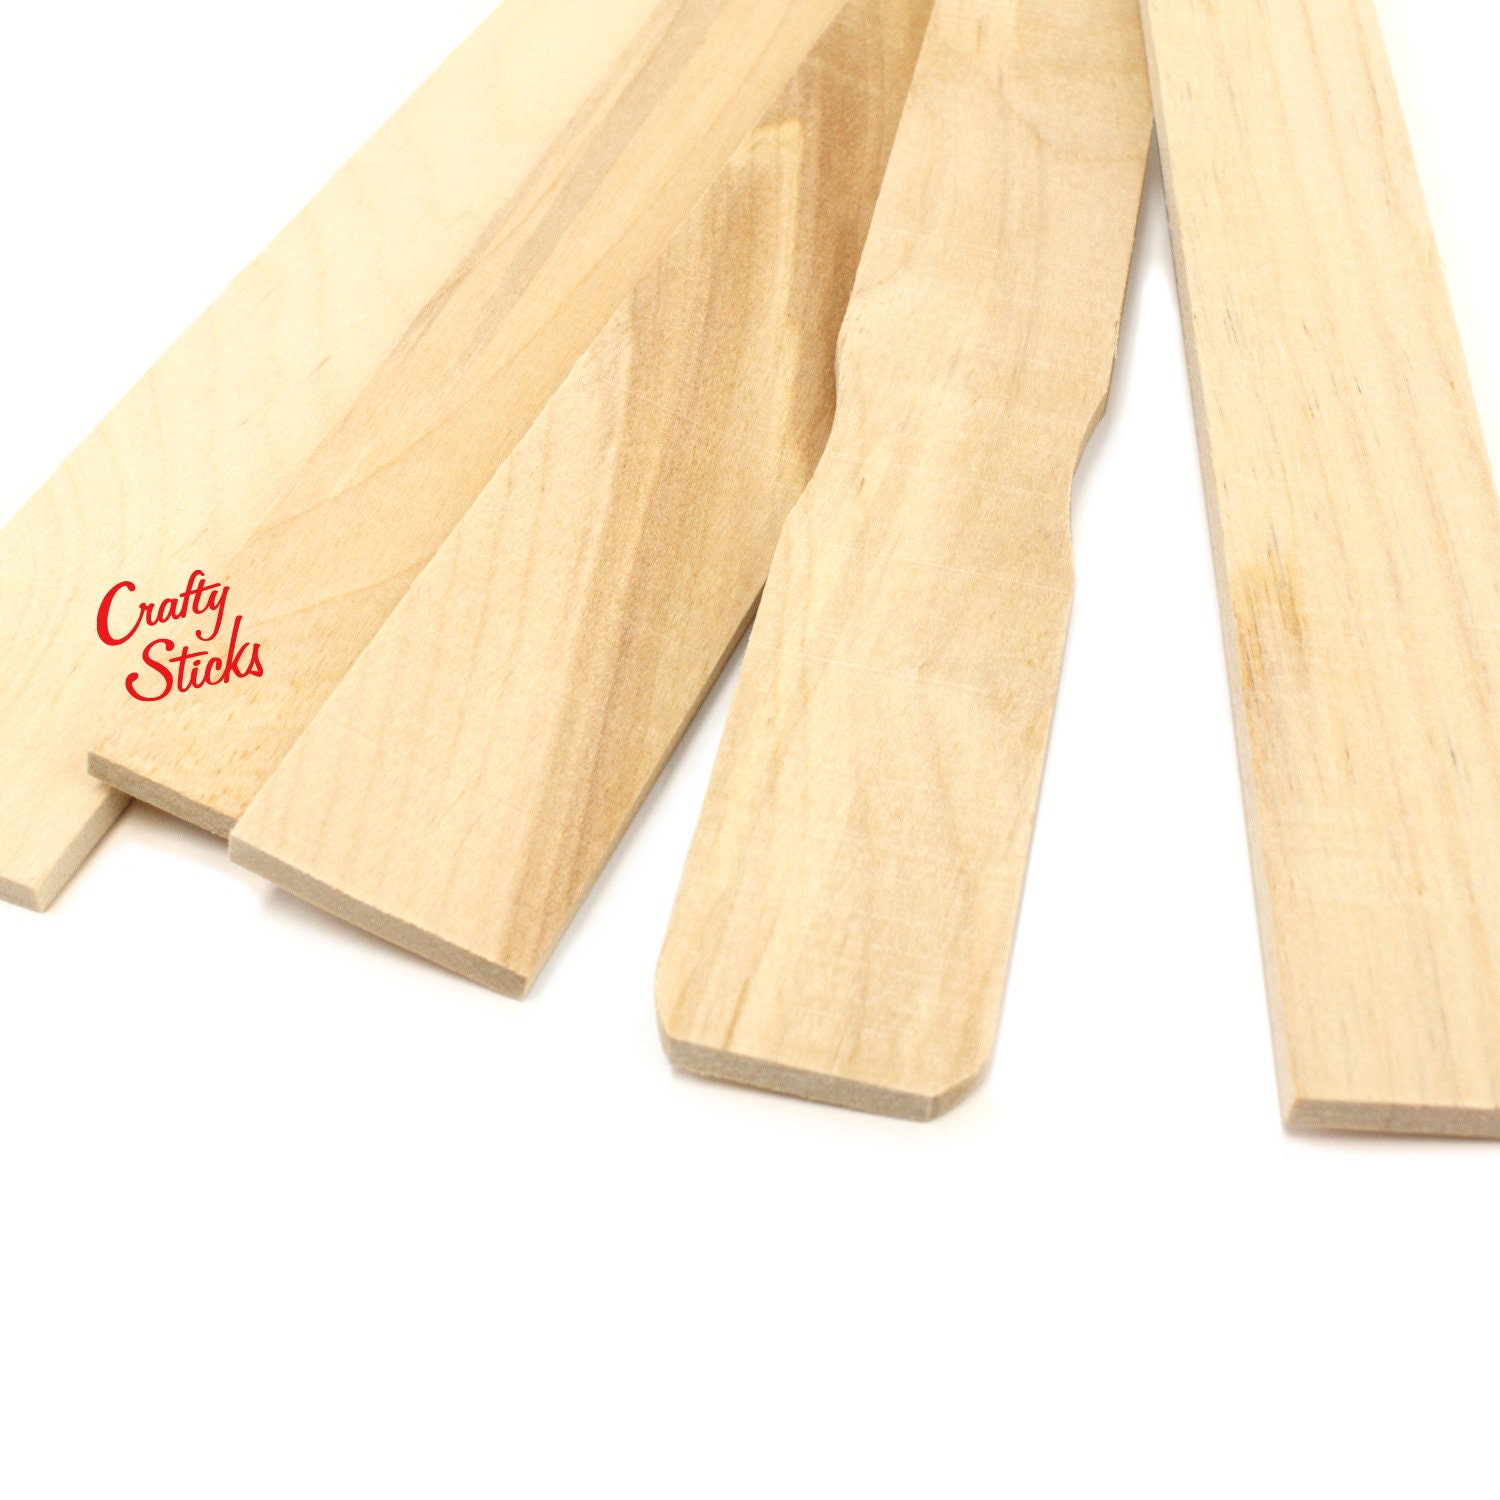 200 Pack Wood Craft Popsicle Sticks Yellow Color 4.5 inch, CraftySticks